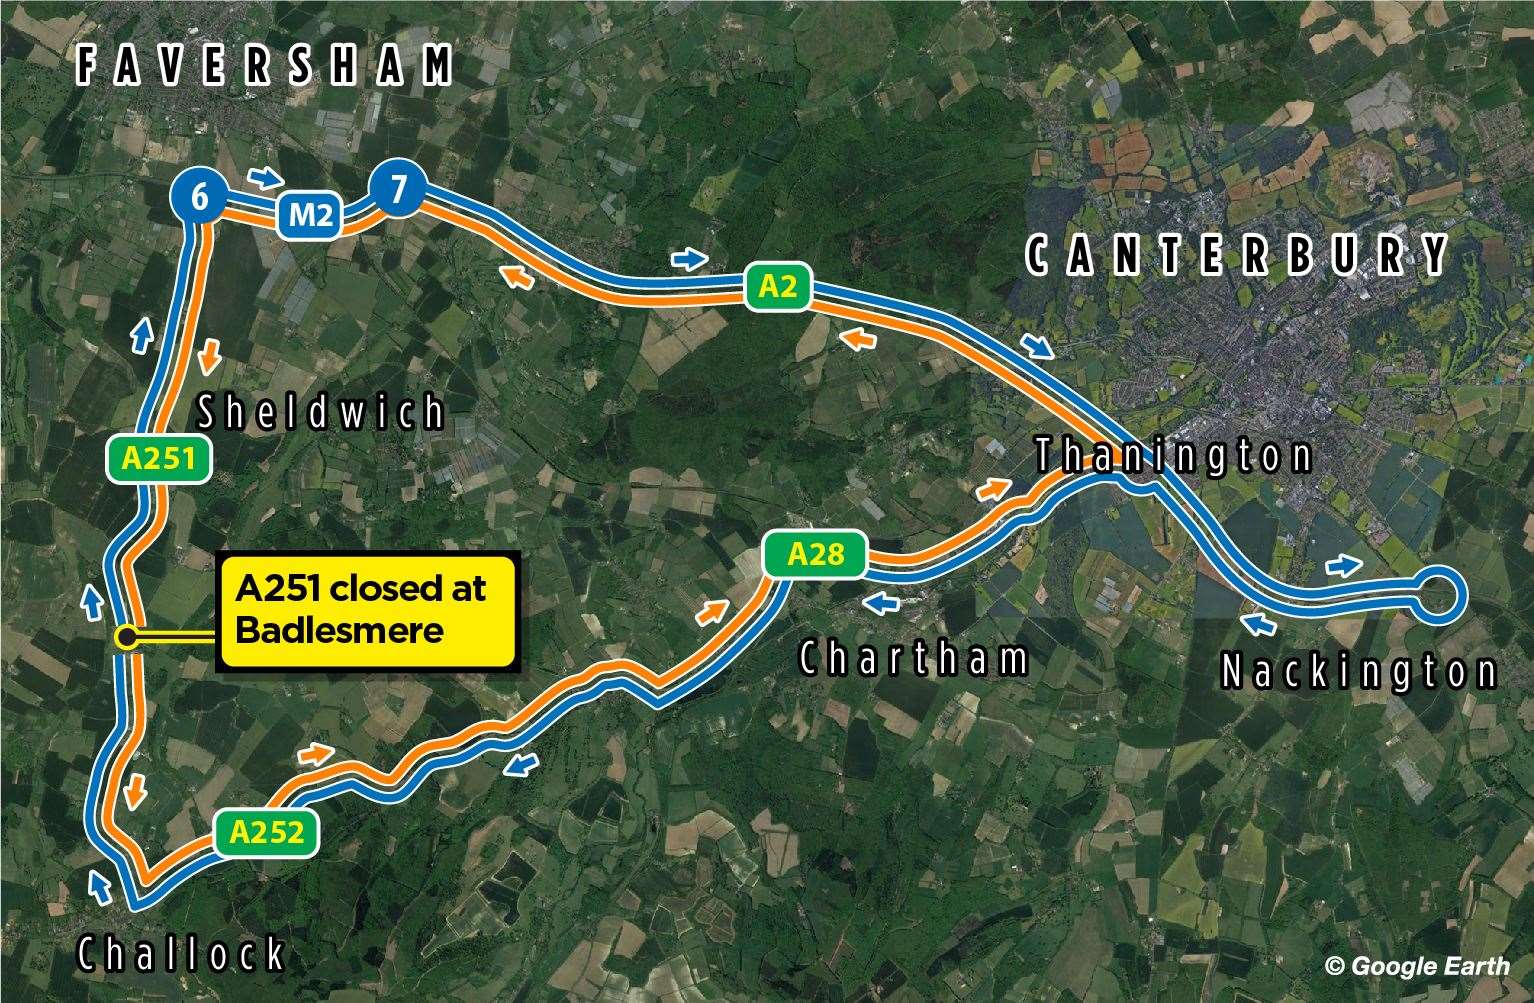 The diversions to be implemented for the A251 closure from Monday, July 27